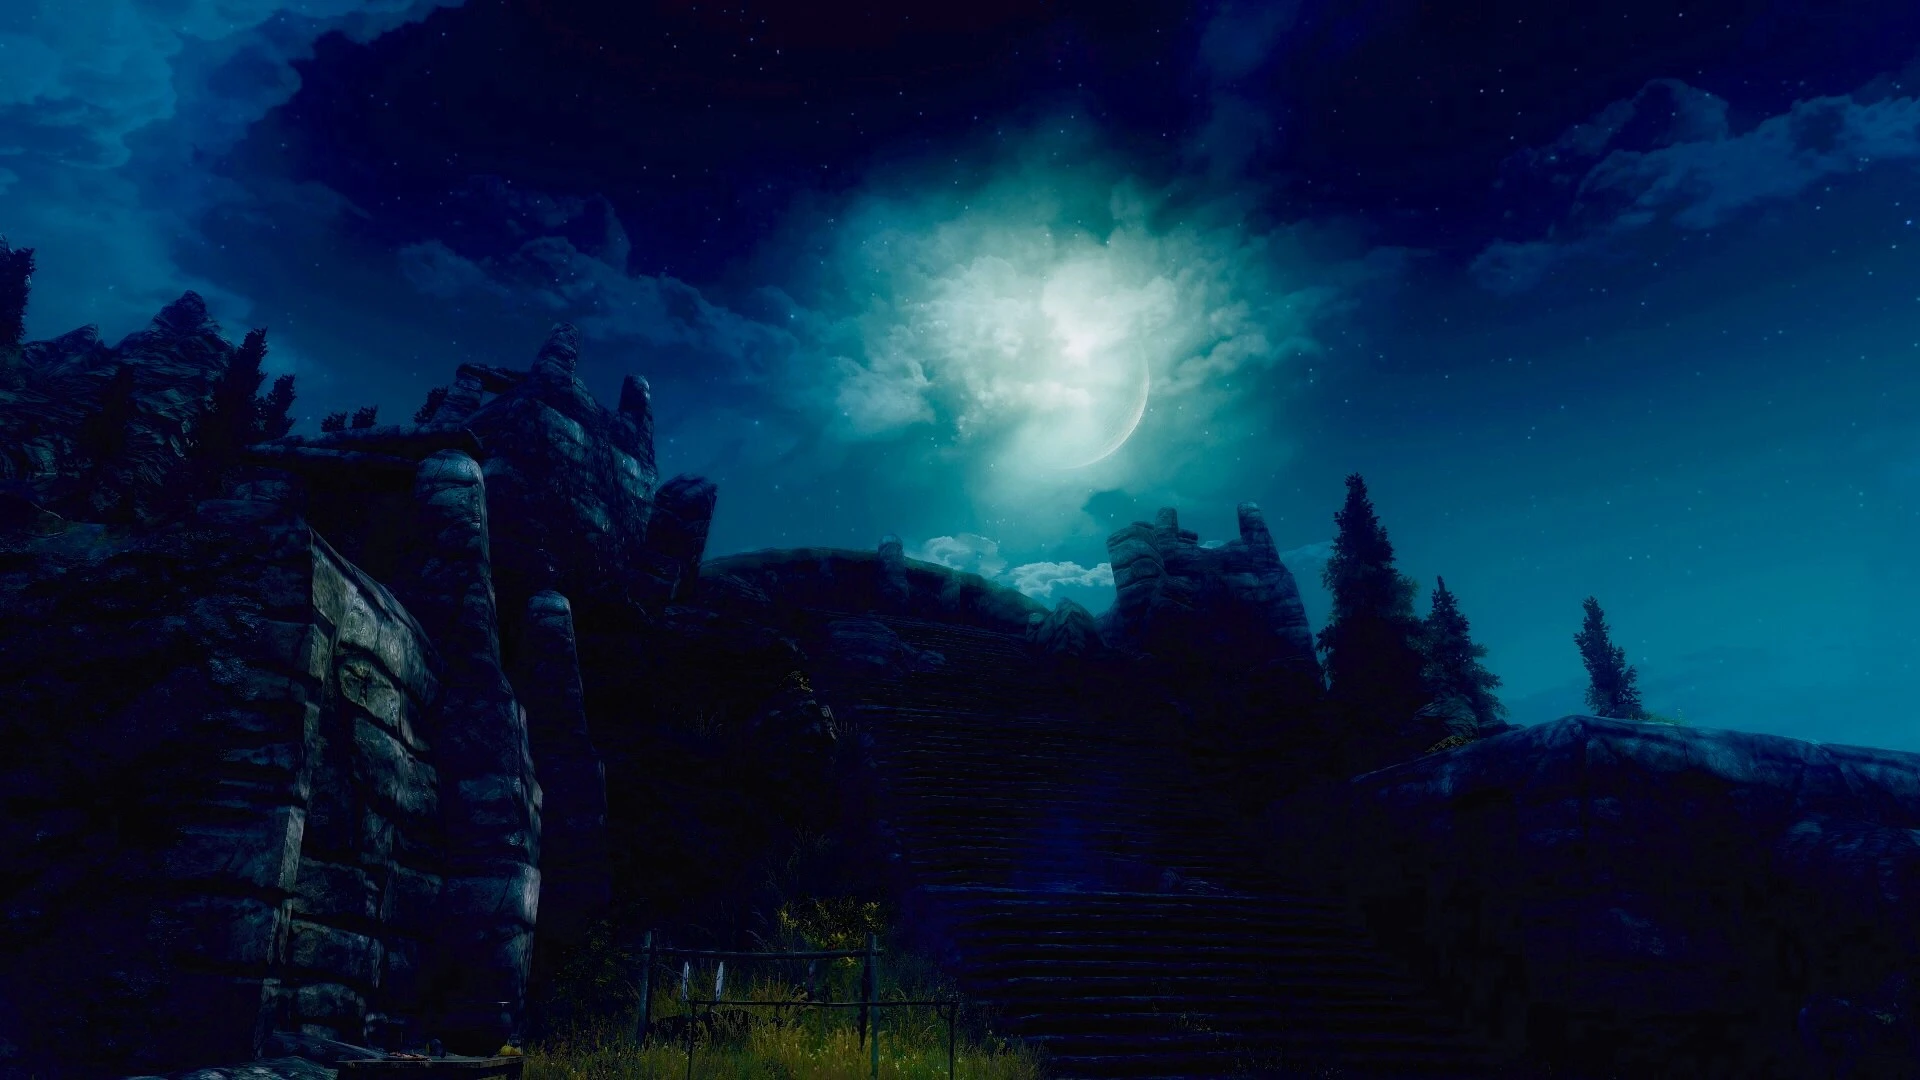 silent moons camp location